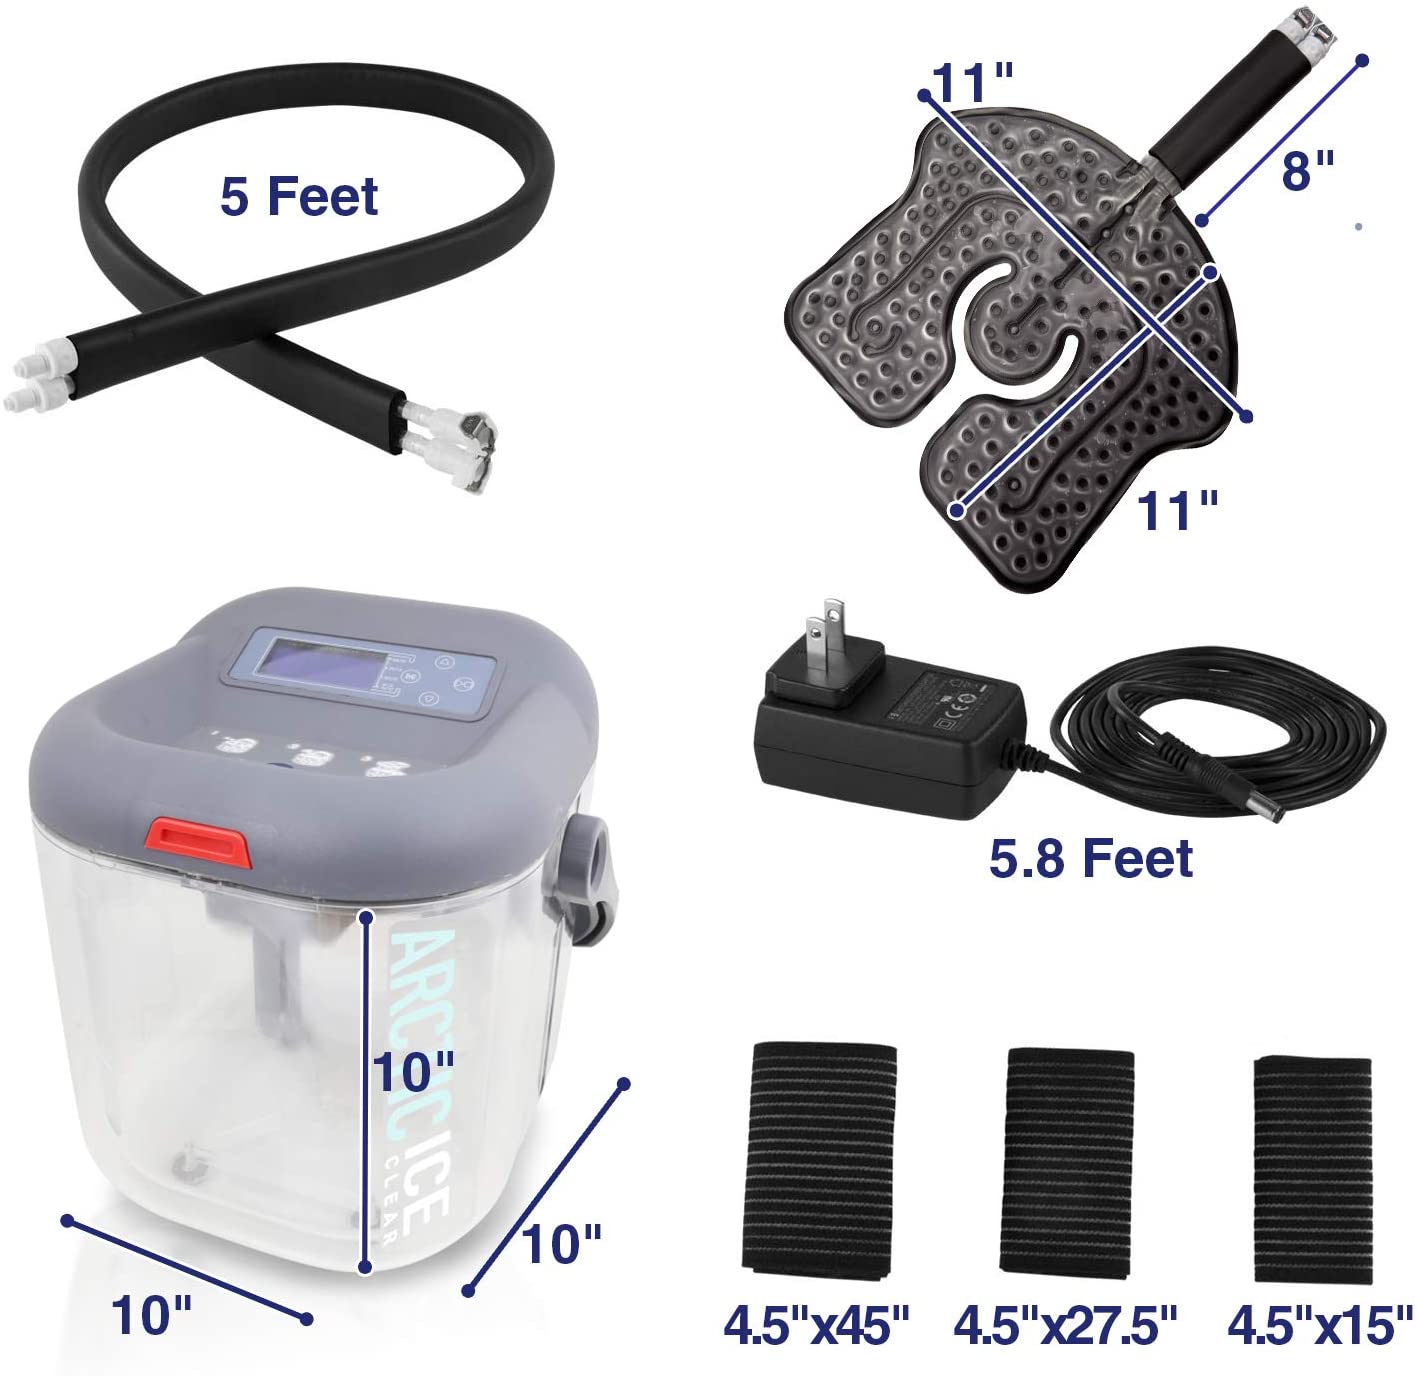 Cold Therapy Machines for Home Use at